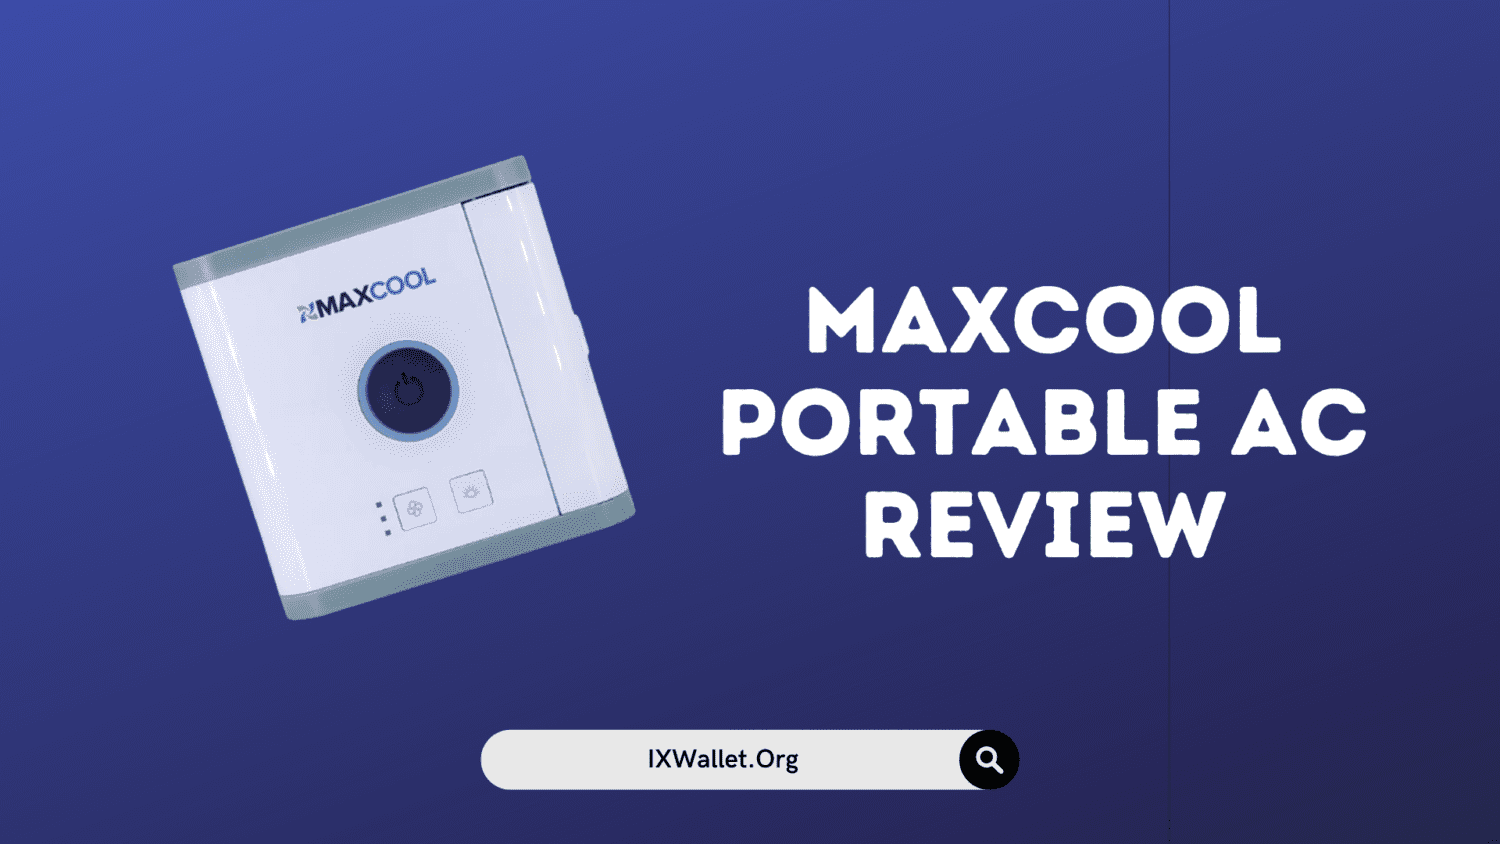 MaxCool Portable AC Review: Is It Legit or Another Scam?